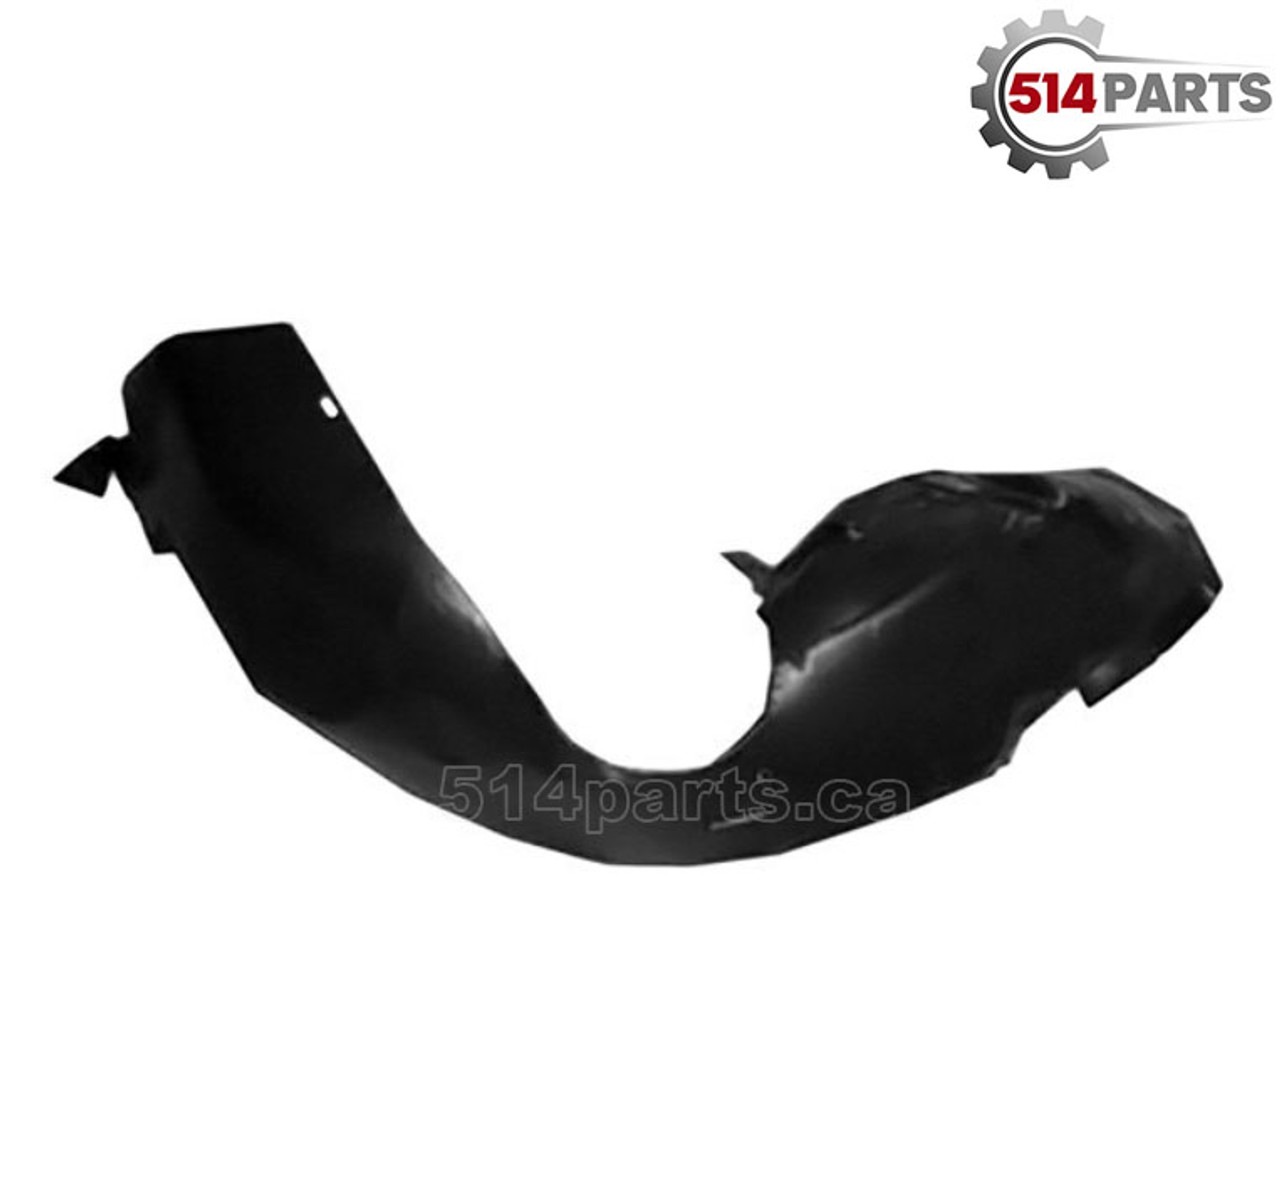 2008 - 2009 FORD TAURUS FENDER LINER - FAUSSE AILE